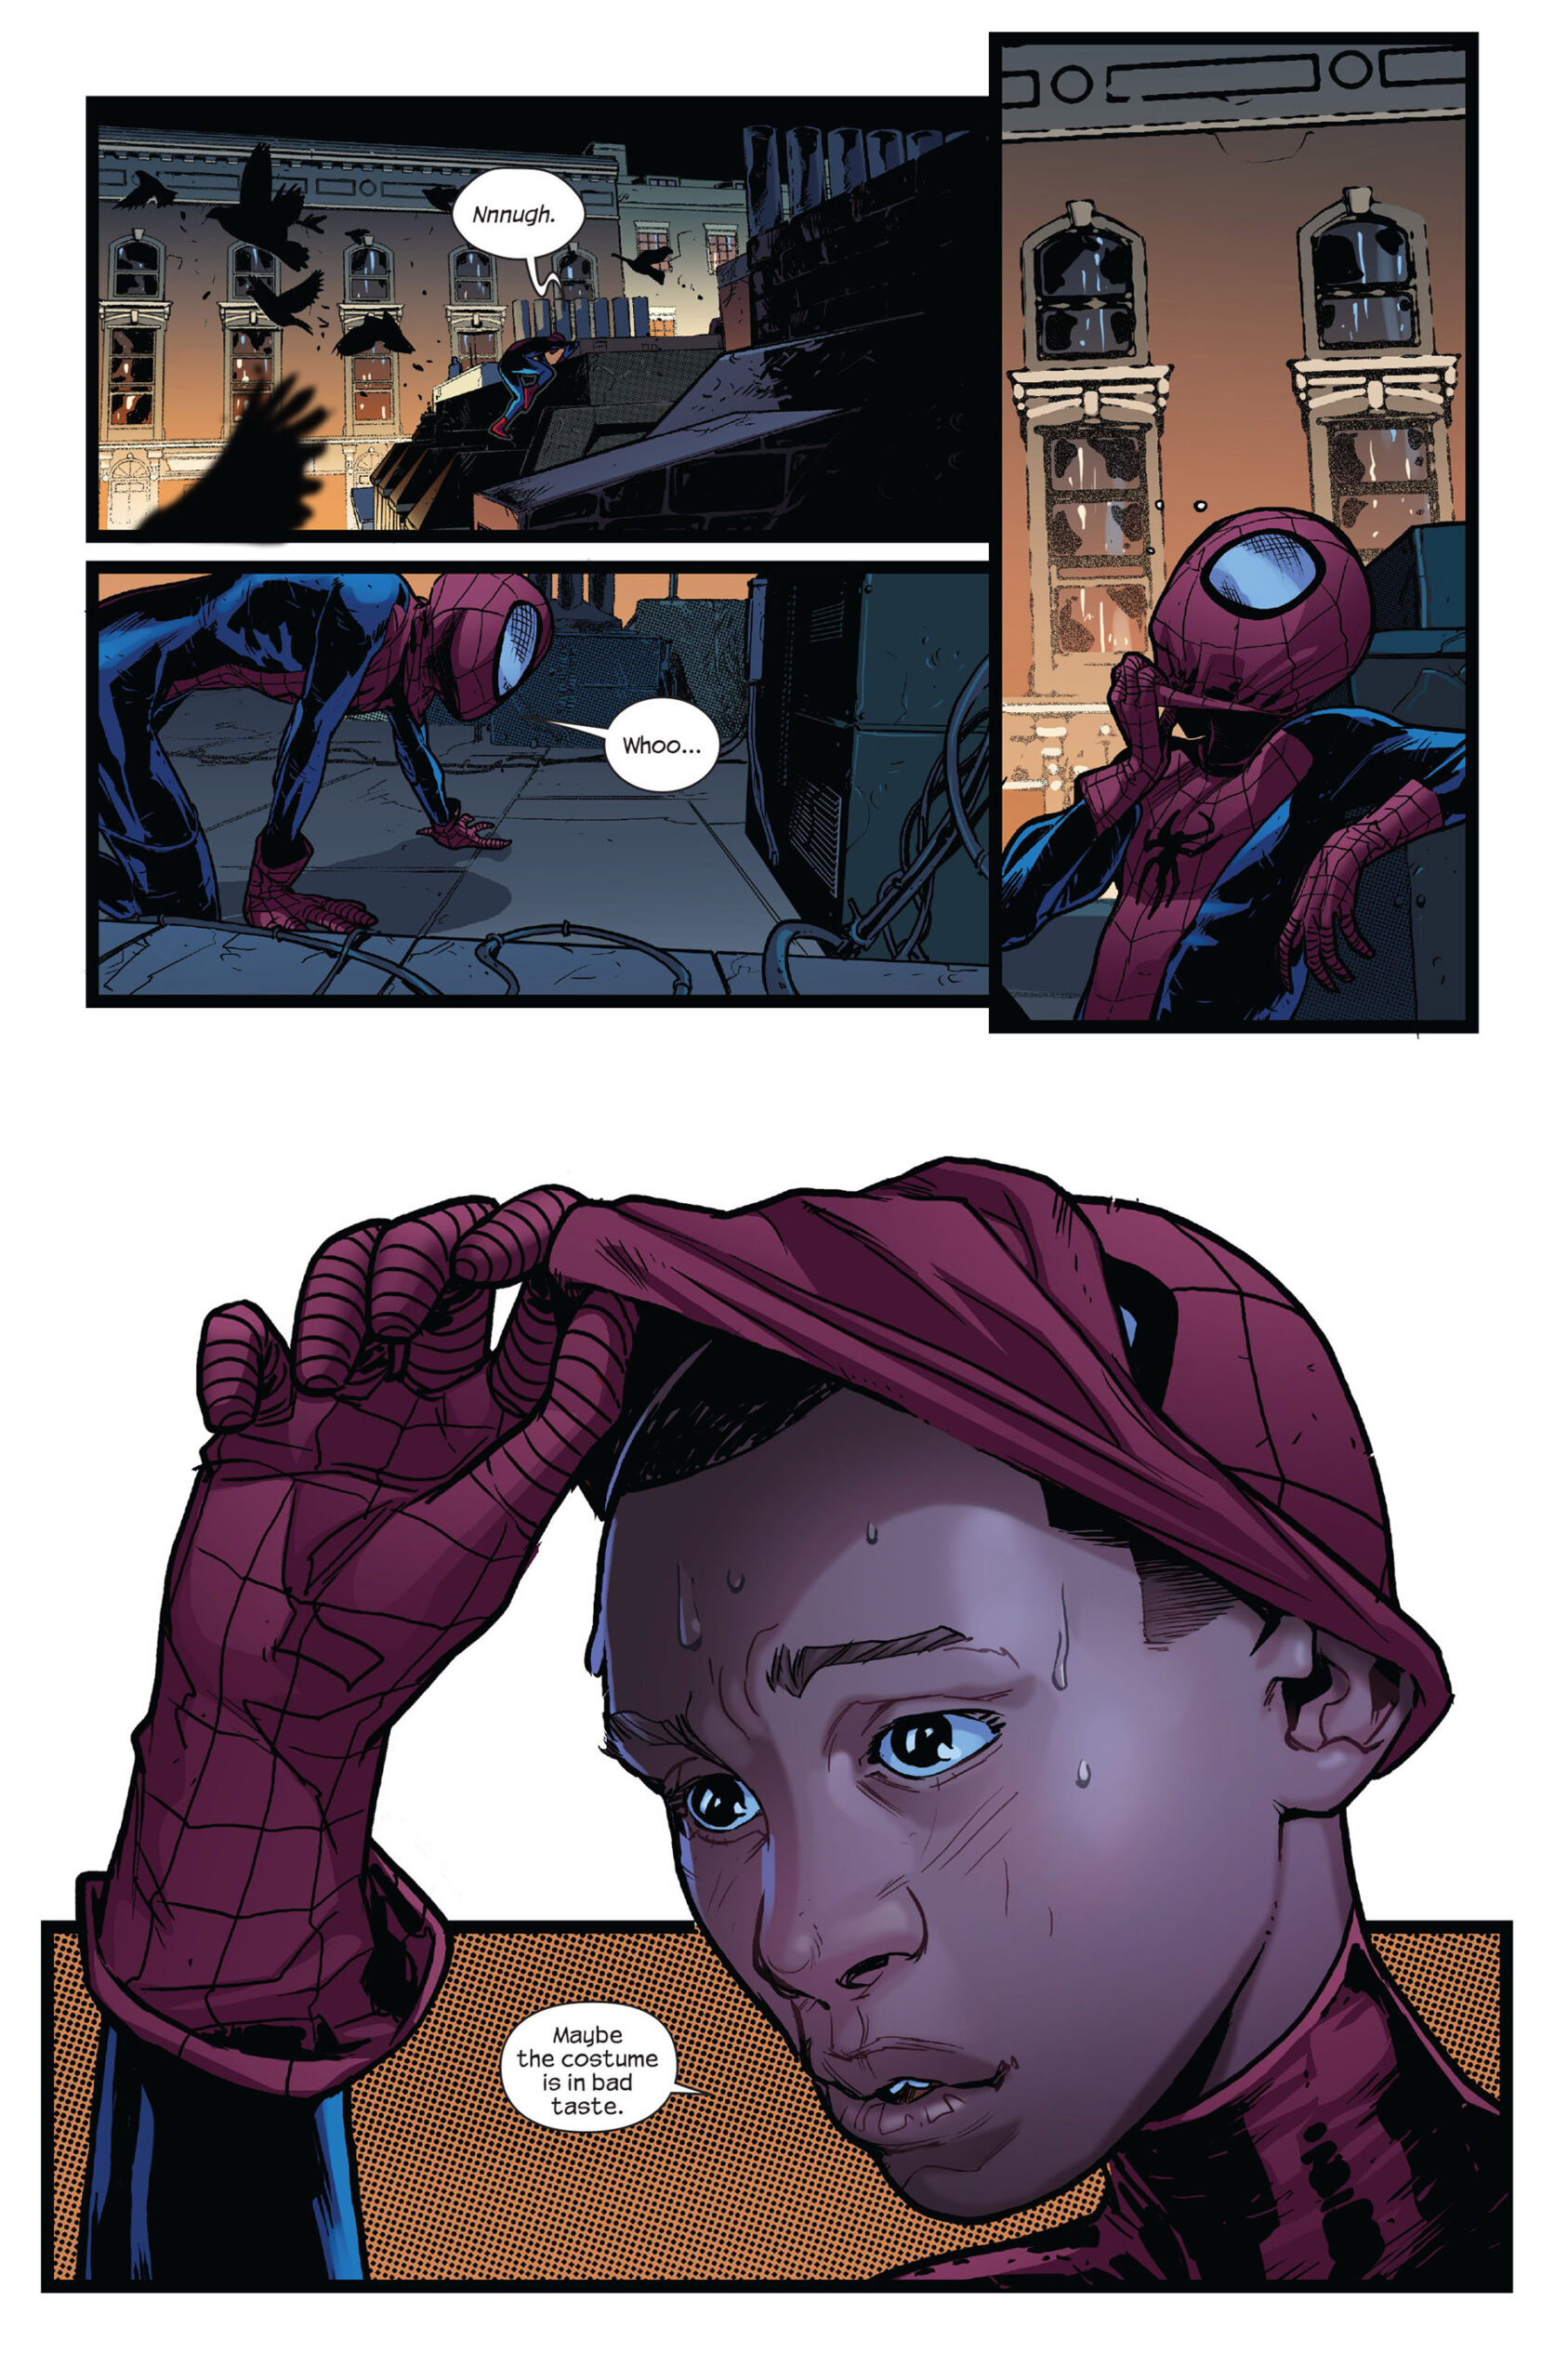 Miles Morales makes his debut in Ultimate Fallout Vol. 1 #4 "Spider-Man No More (Part IV)" (2011), Marvel Comics. Words by Brian Michael Bendis, art by Sara Pichelli, Justin Ponsor, and Cory Petit.